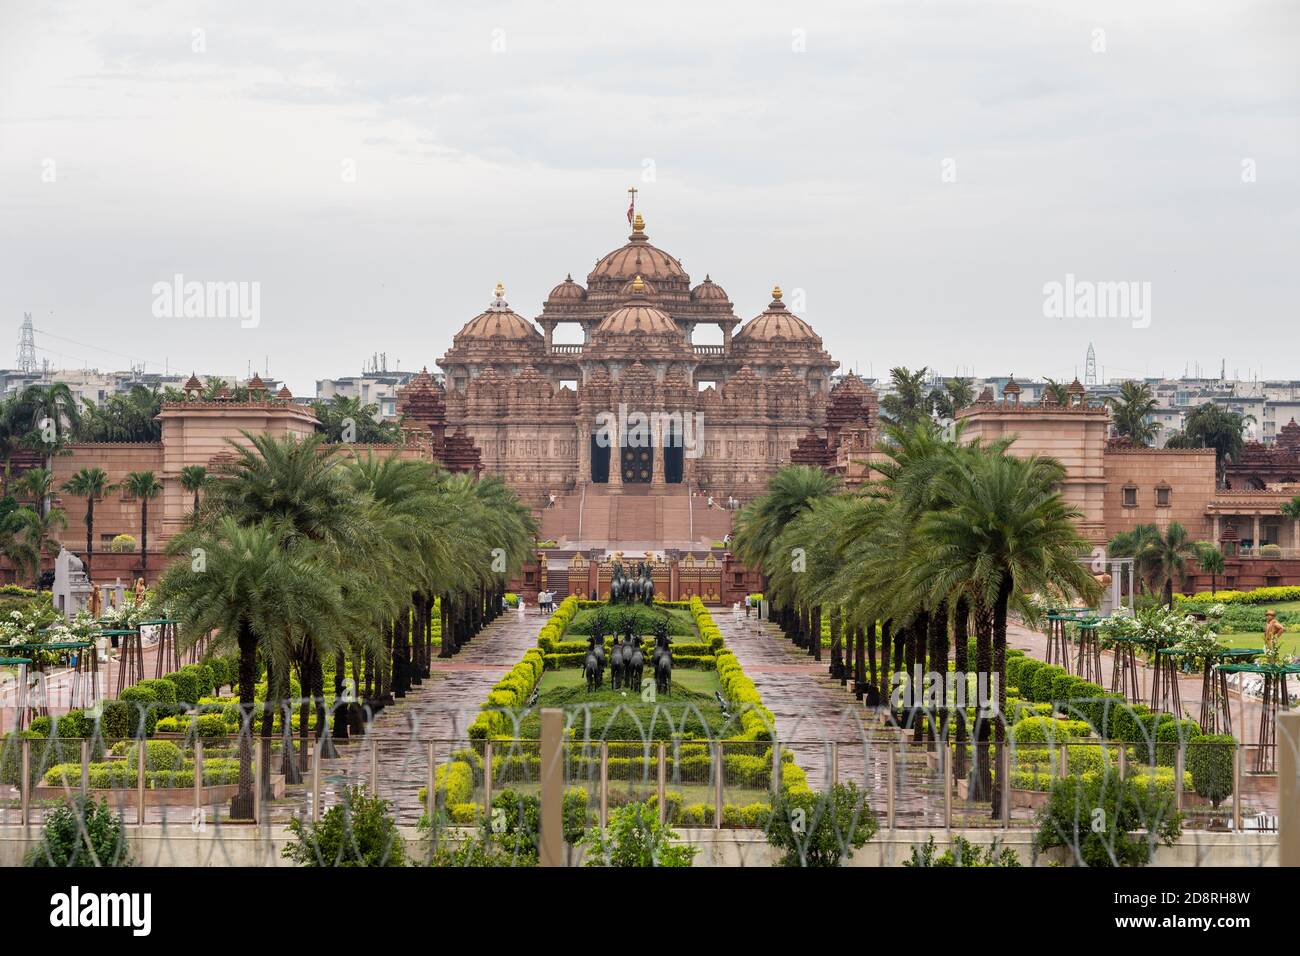 View of the famous Akshardham temple in New Delhi. Stock Photo